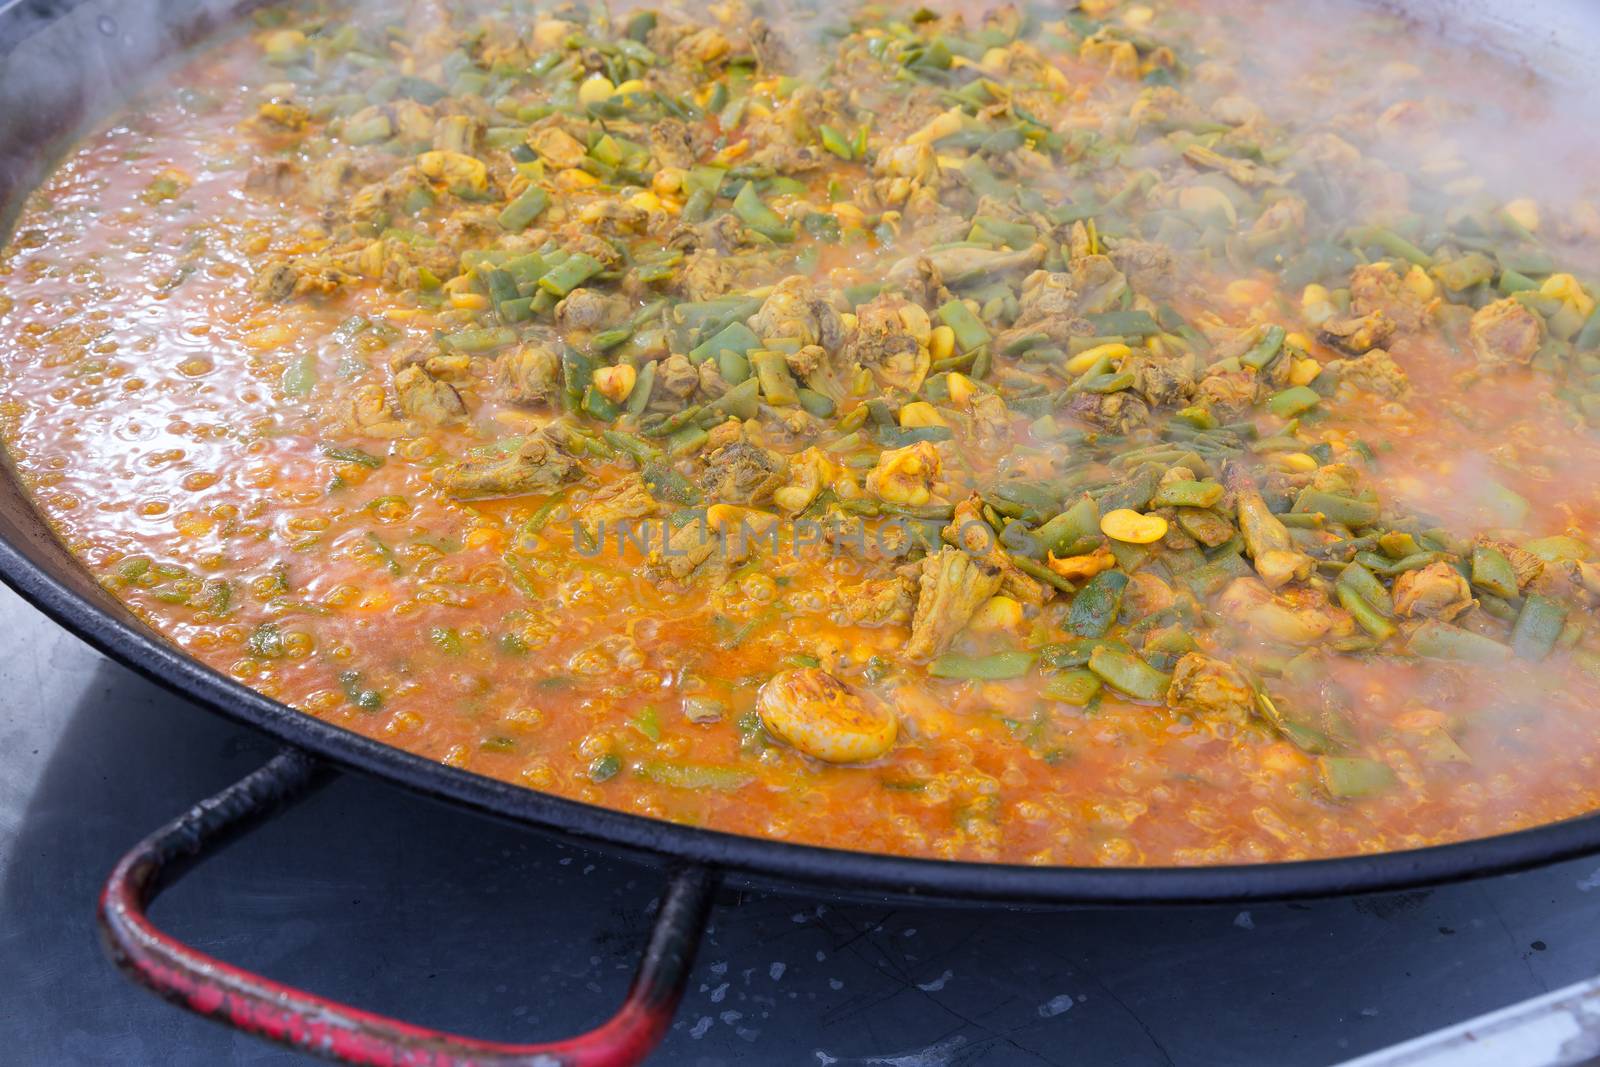 Cooking paella typical from Valencia Spain recipe with rice beans chicken and good hand